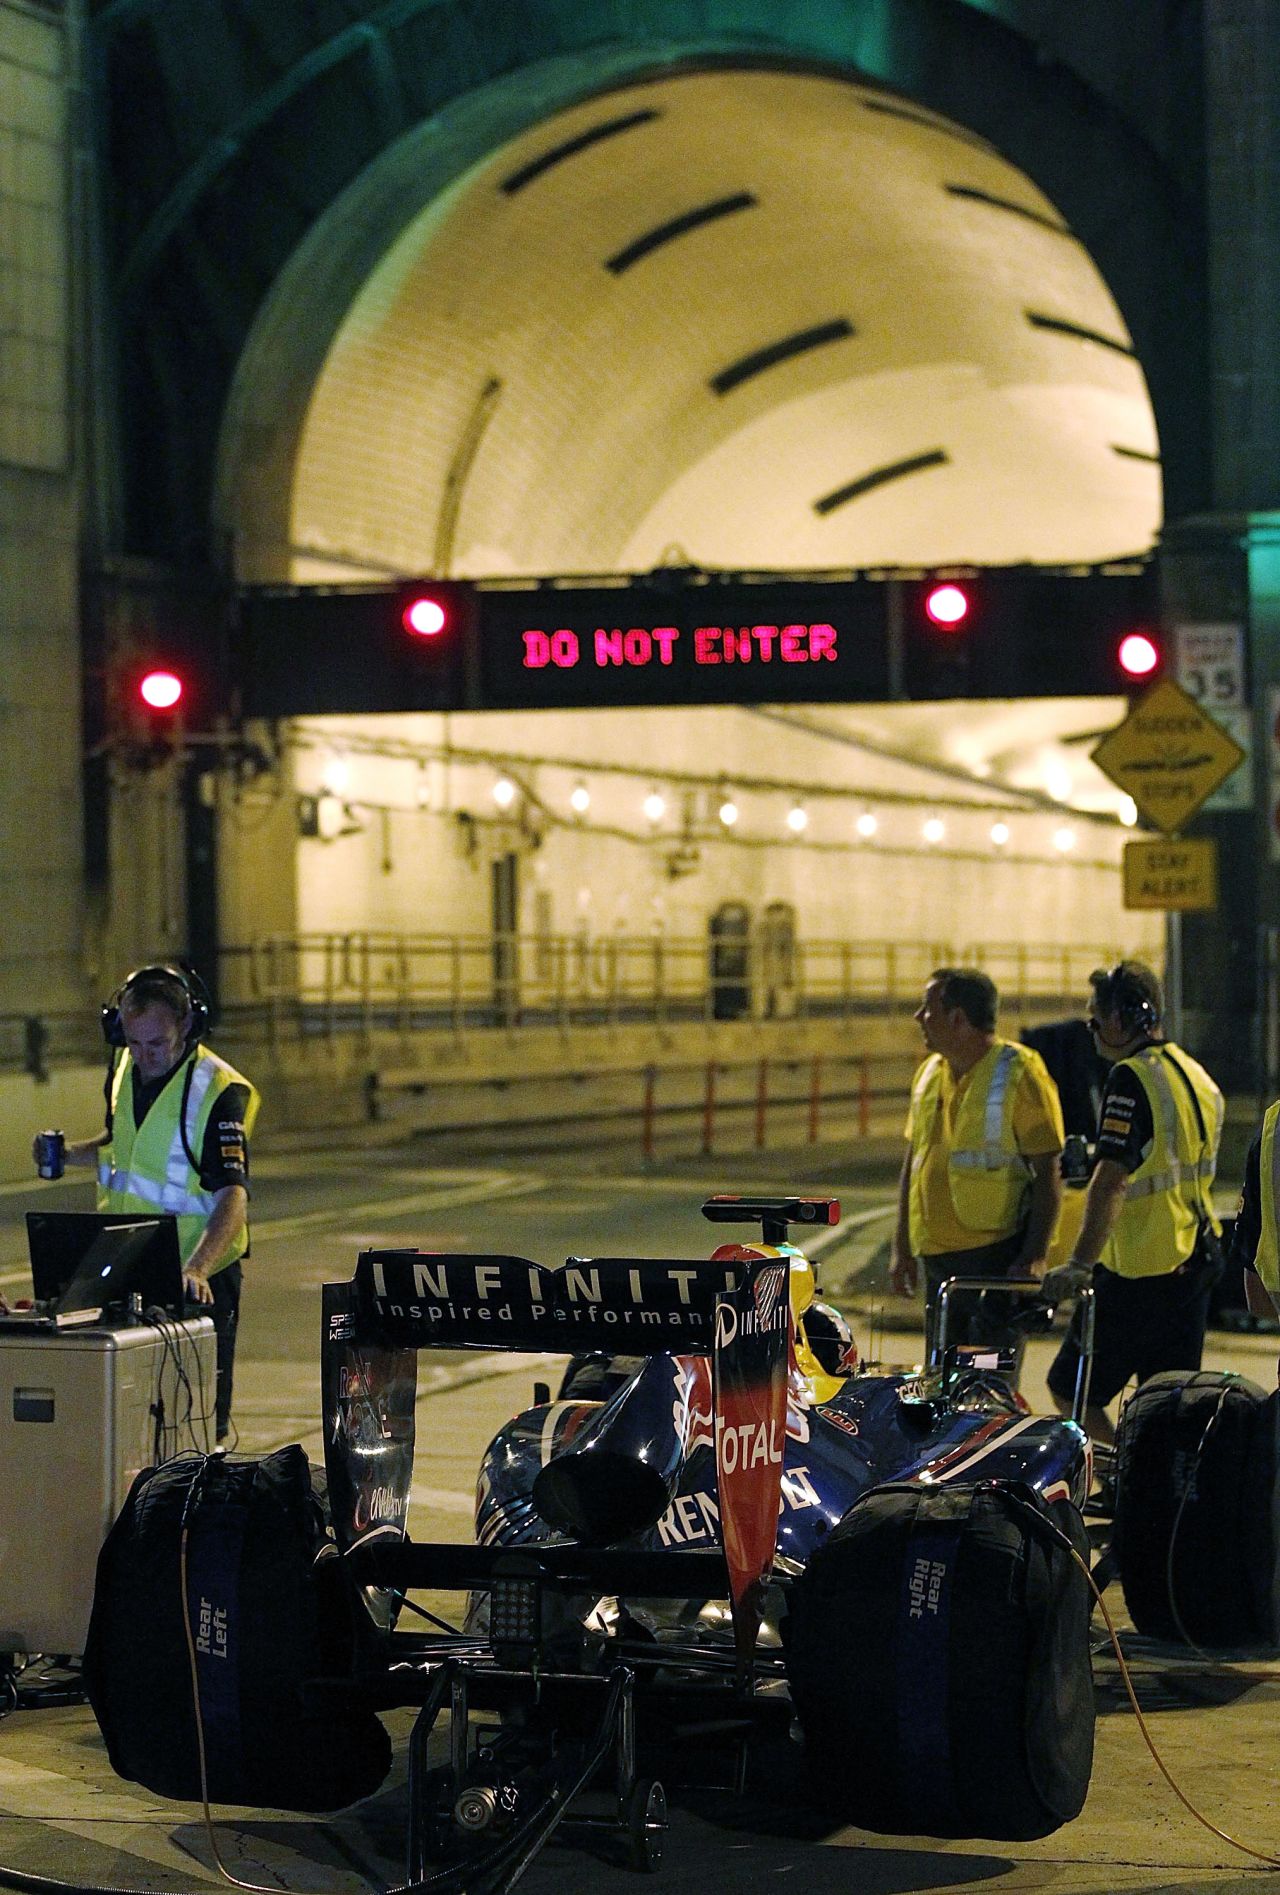 Last-minutes checks were made before the RB7 sped through the Lincoln Tunnel, which connects Weehawken, New Jersey and Manhattan.